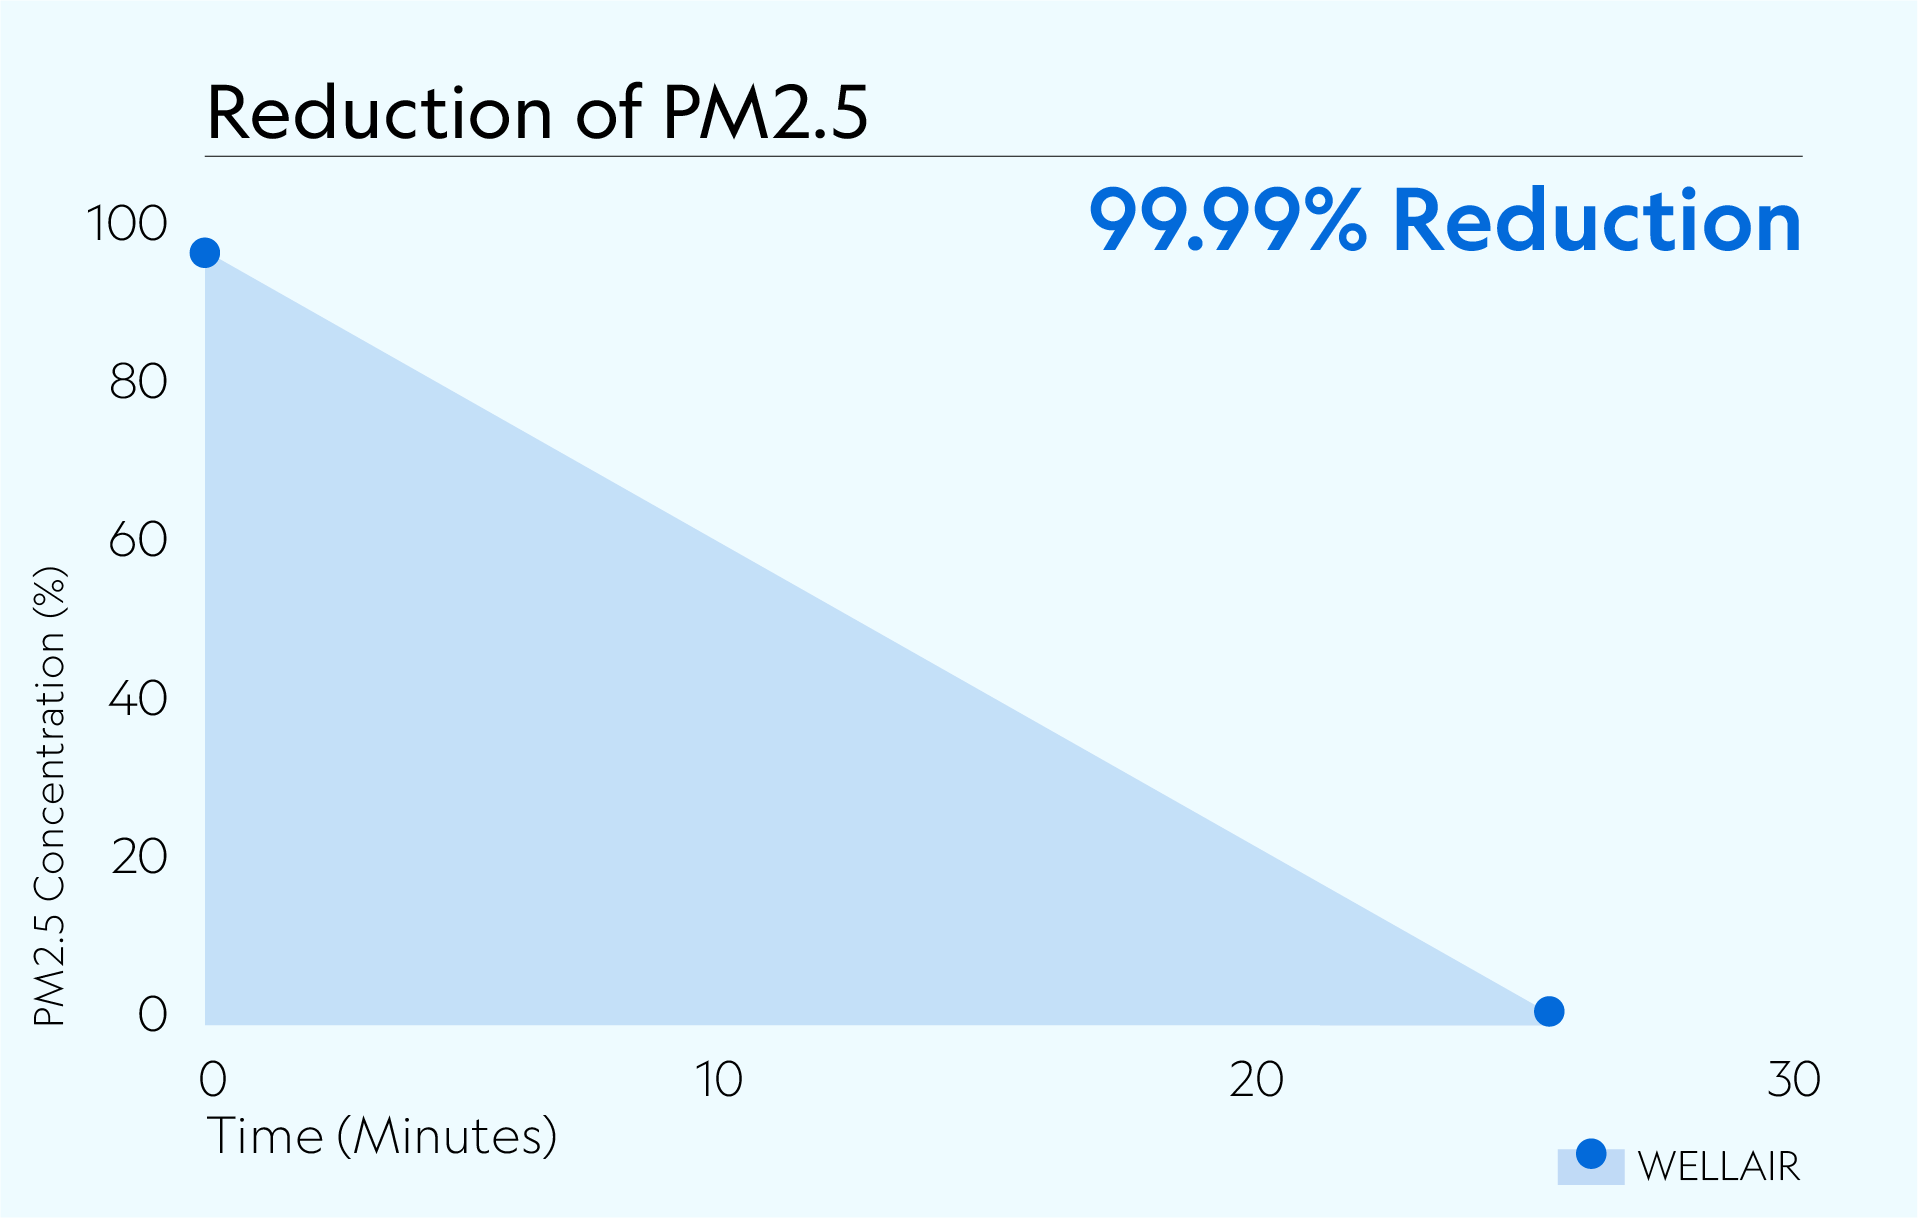 Defend 400 achieved 99.99% reduction of PM2.5